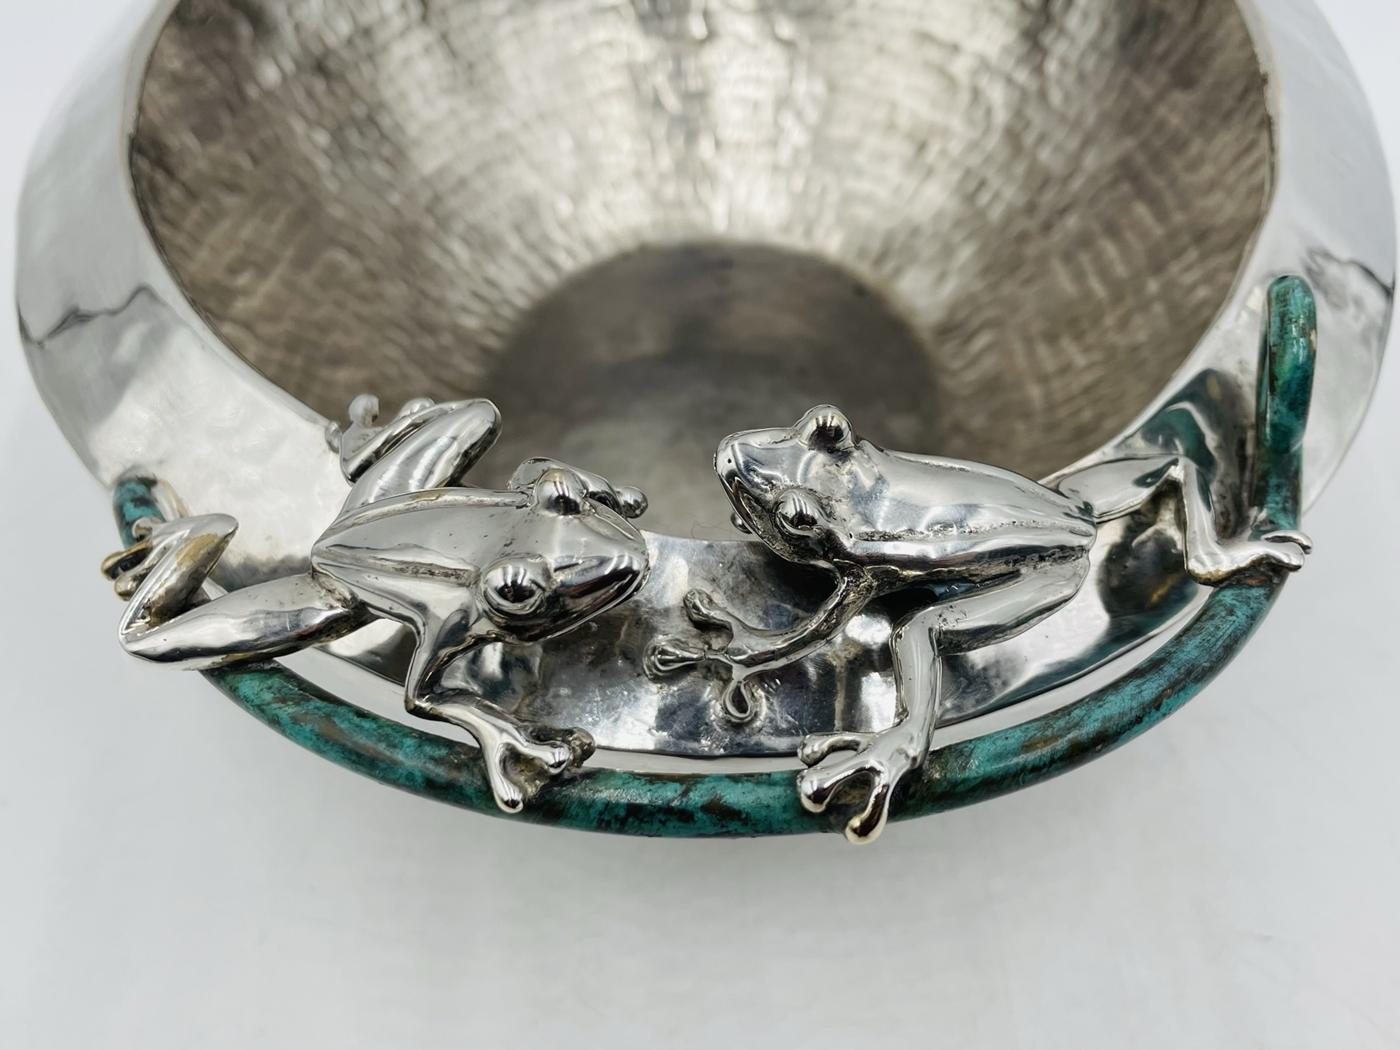 Large Silver-Plated Bowl With Frogs Handles by Emilia Castillo, Mexico 21st Cent For Sale 4